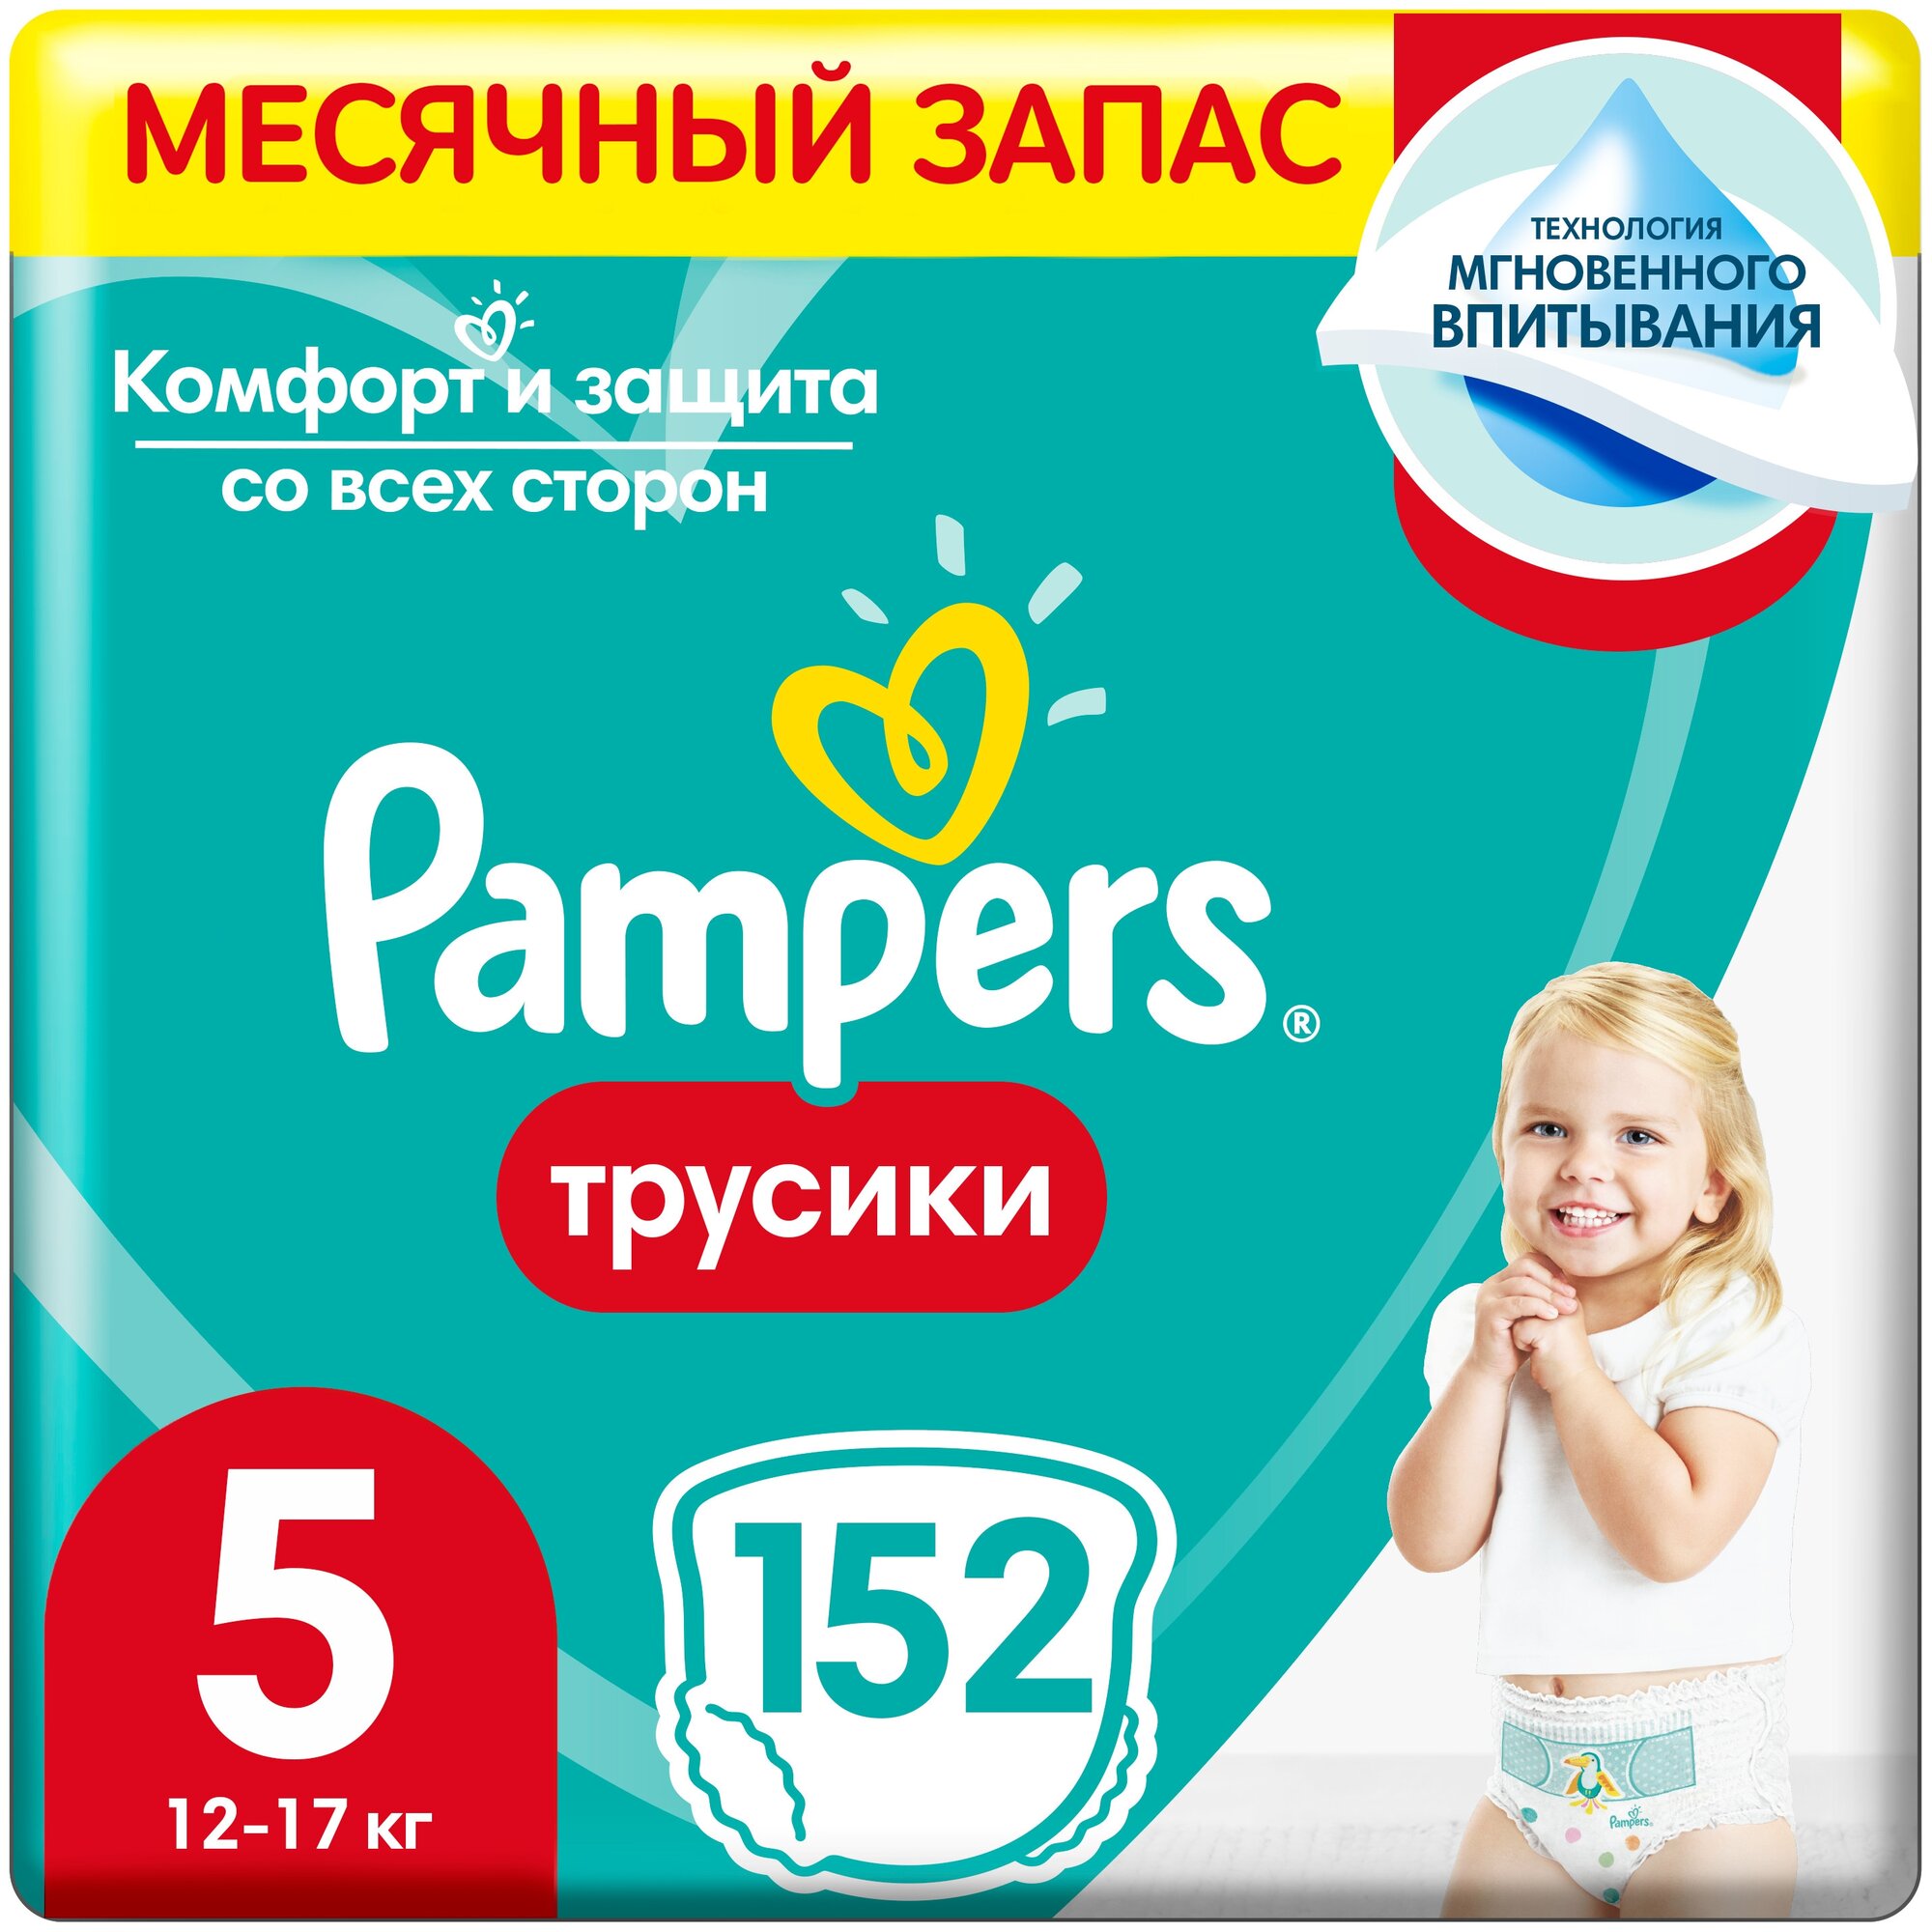 - Pampers Pants 12-17 ,  5, 152.